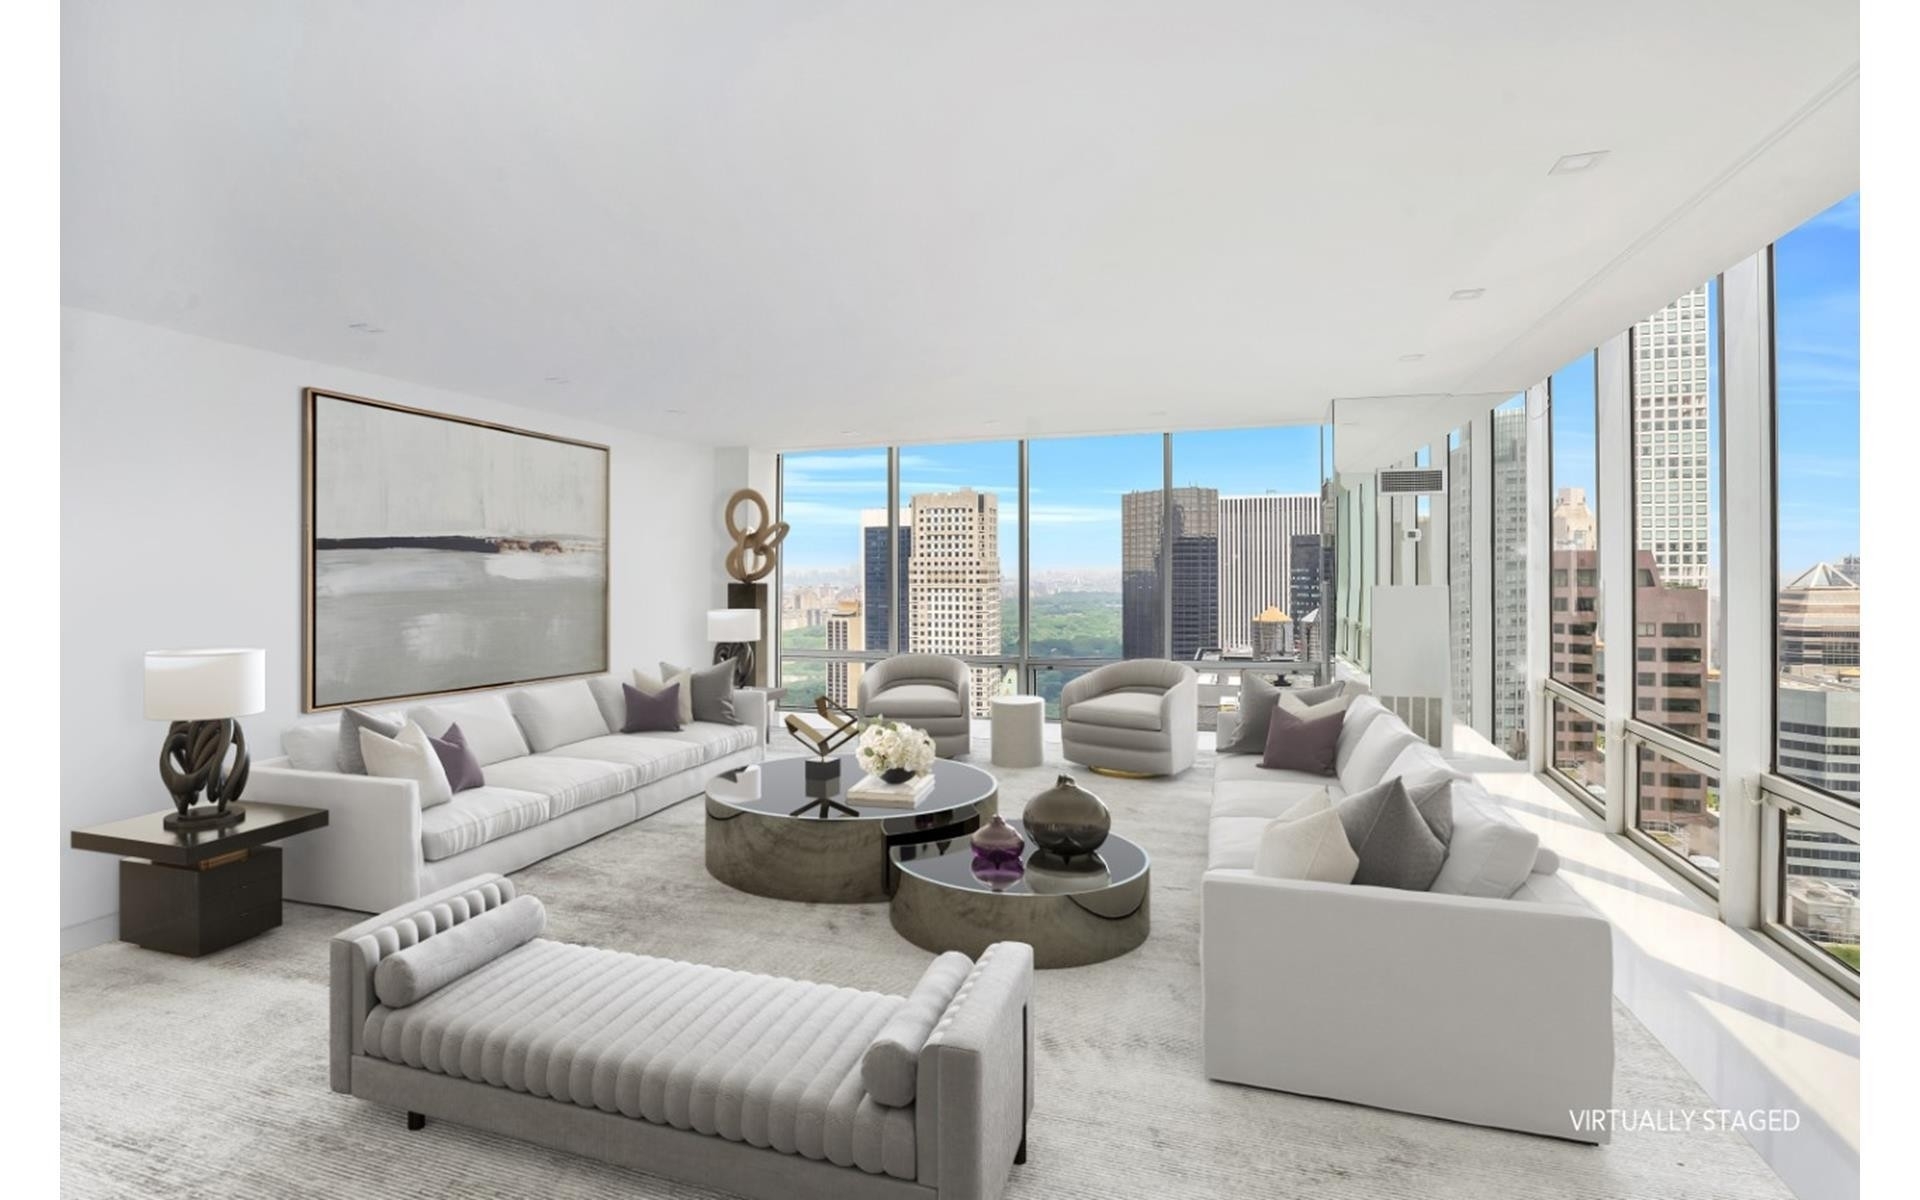 1. Condominiums for Sale at Olympic Tower, 641 FIFTH AVE, 46/47C Turtle Bay, New York, NY 10022